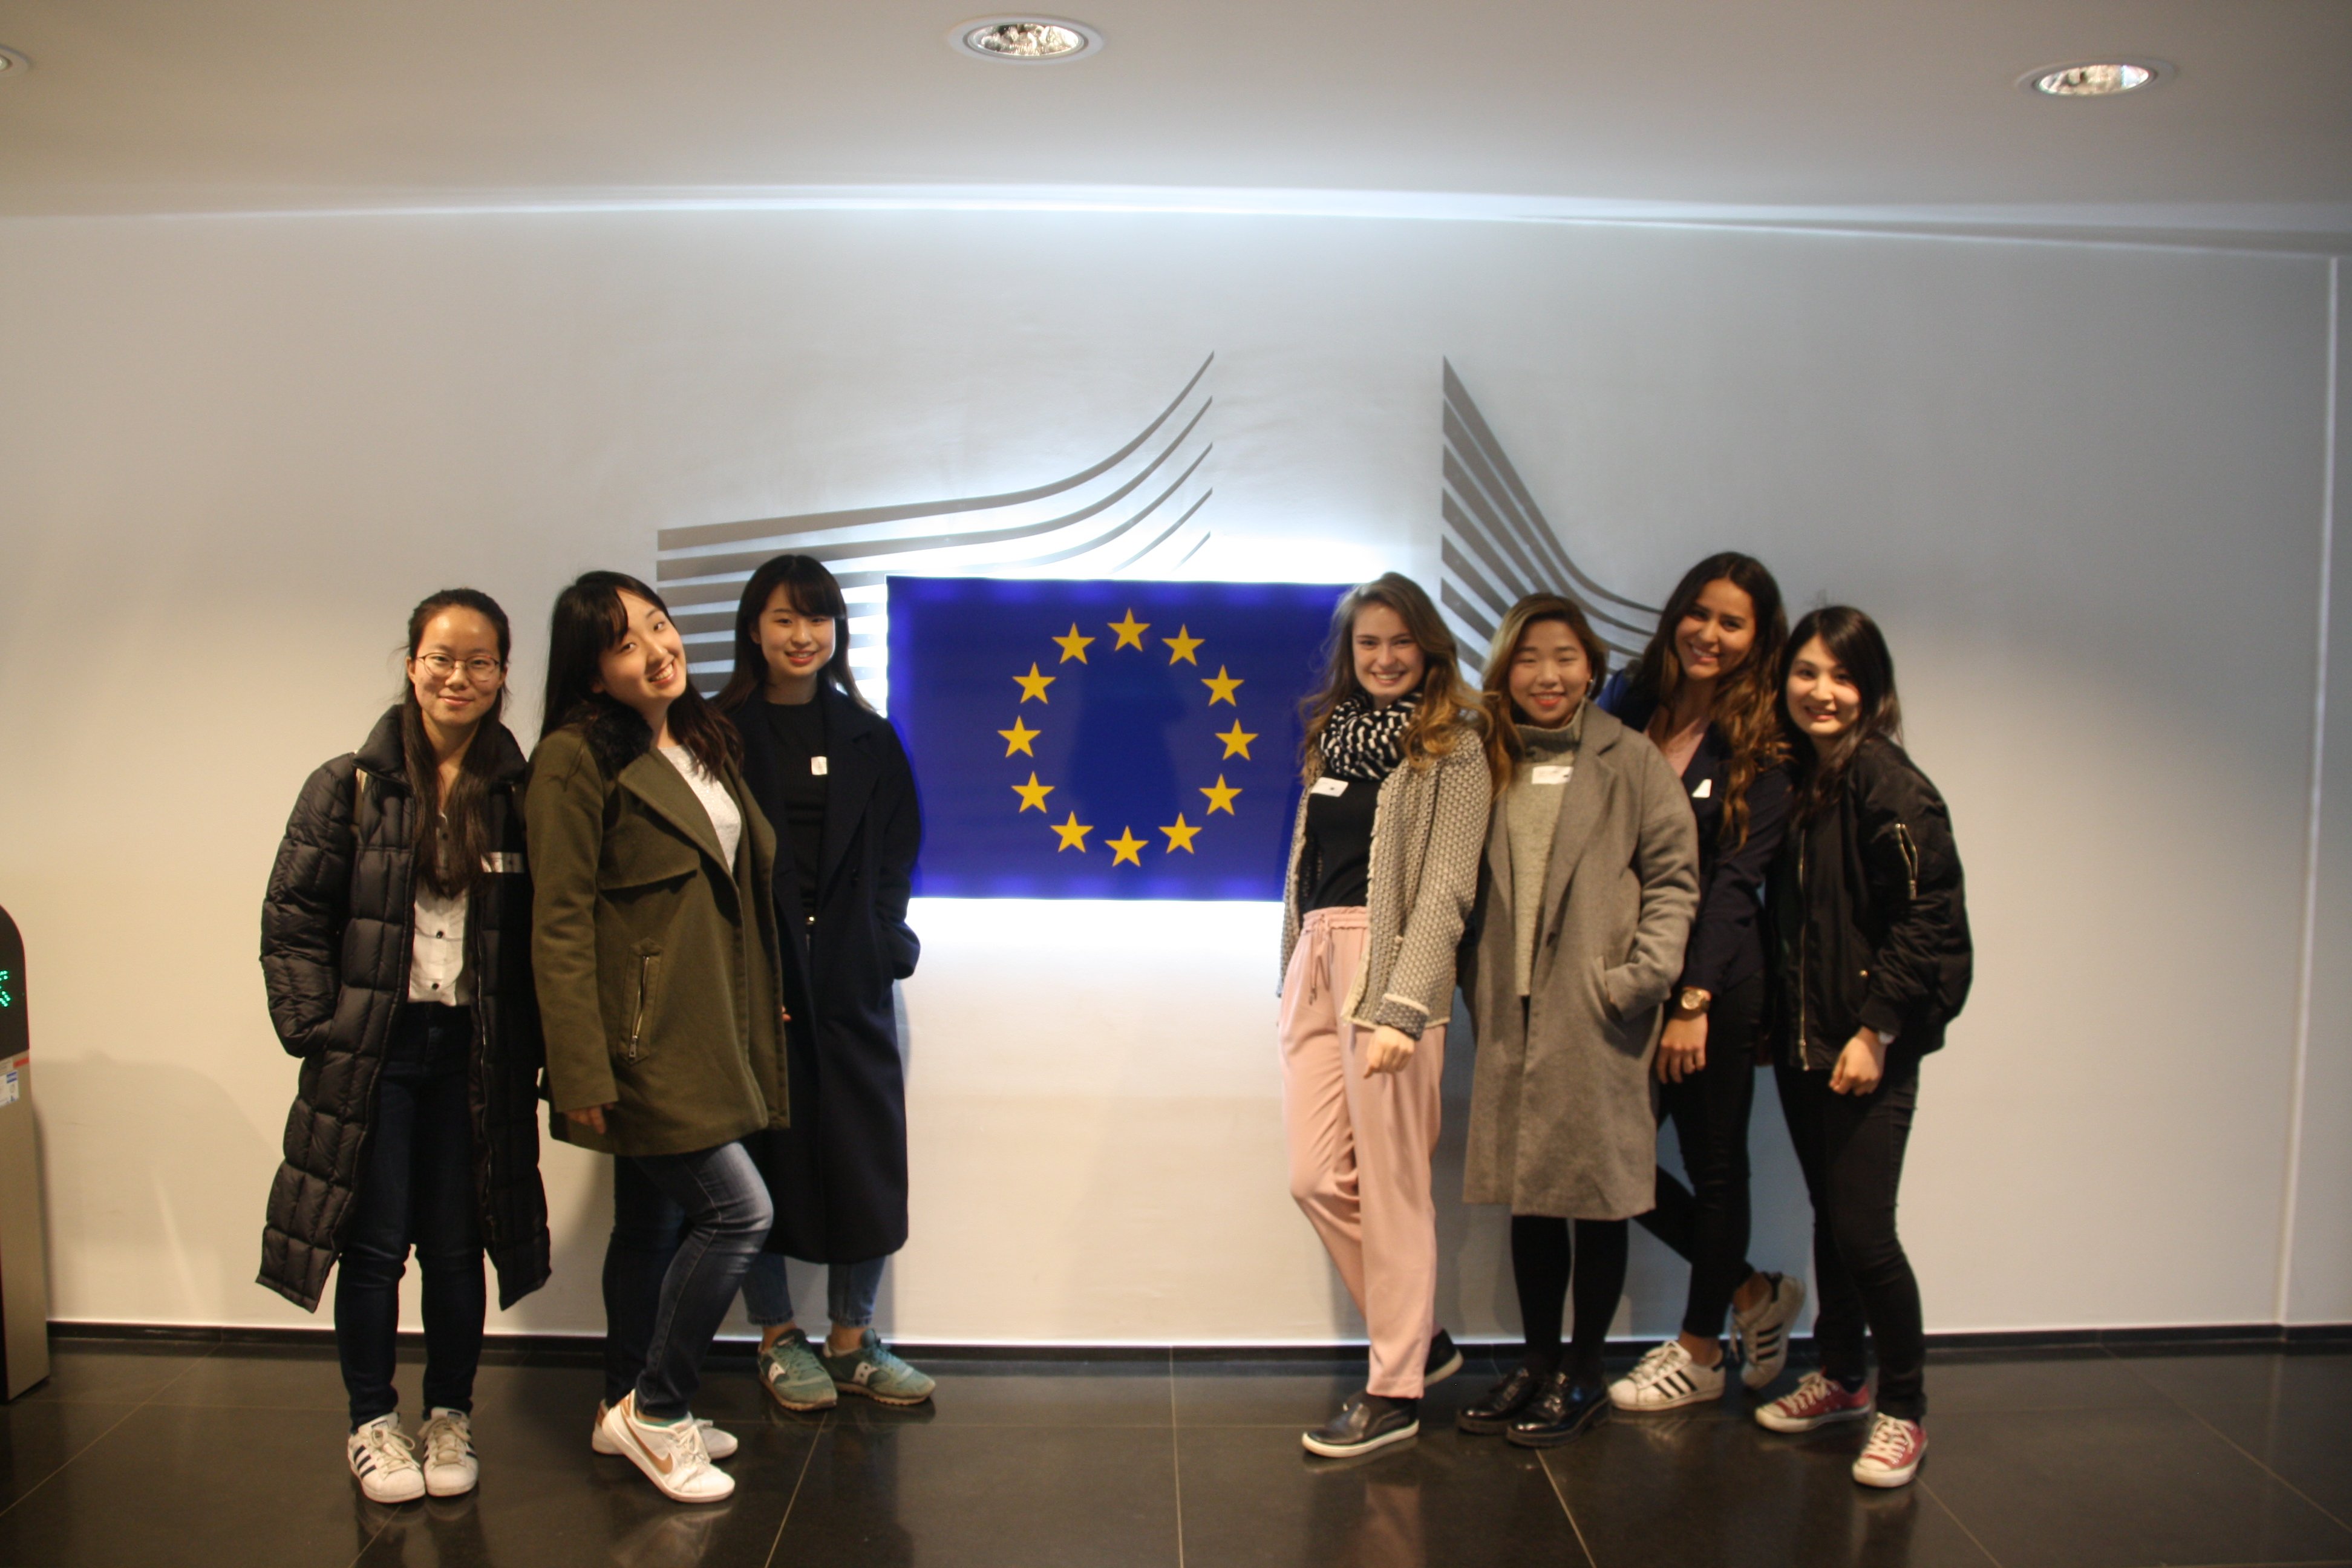 Students standing next to the logo of the European Commision